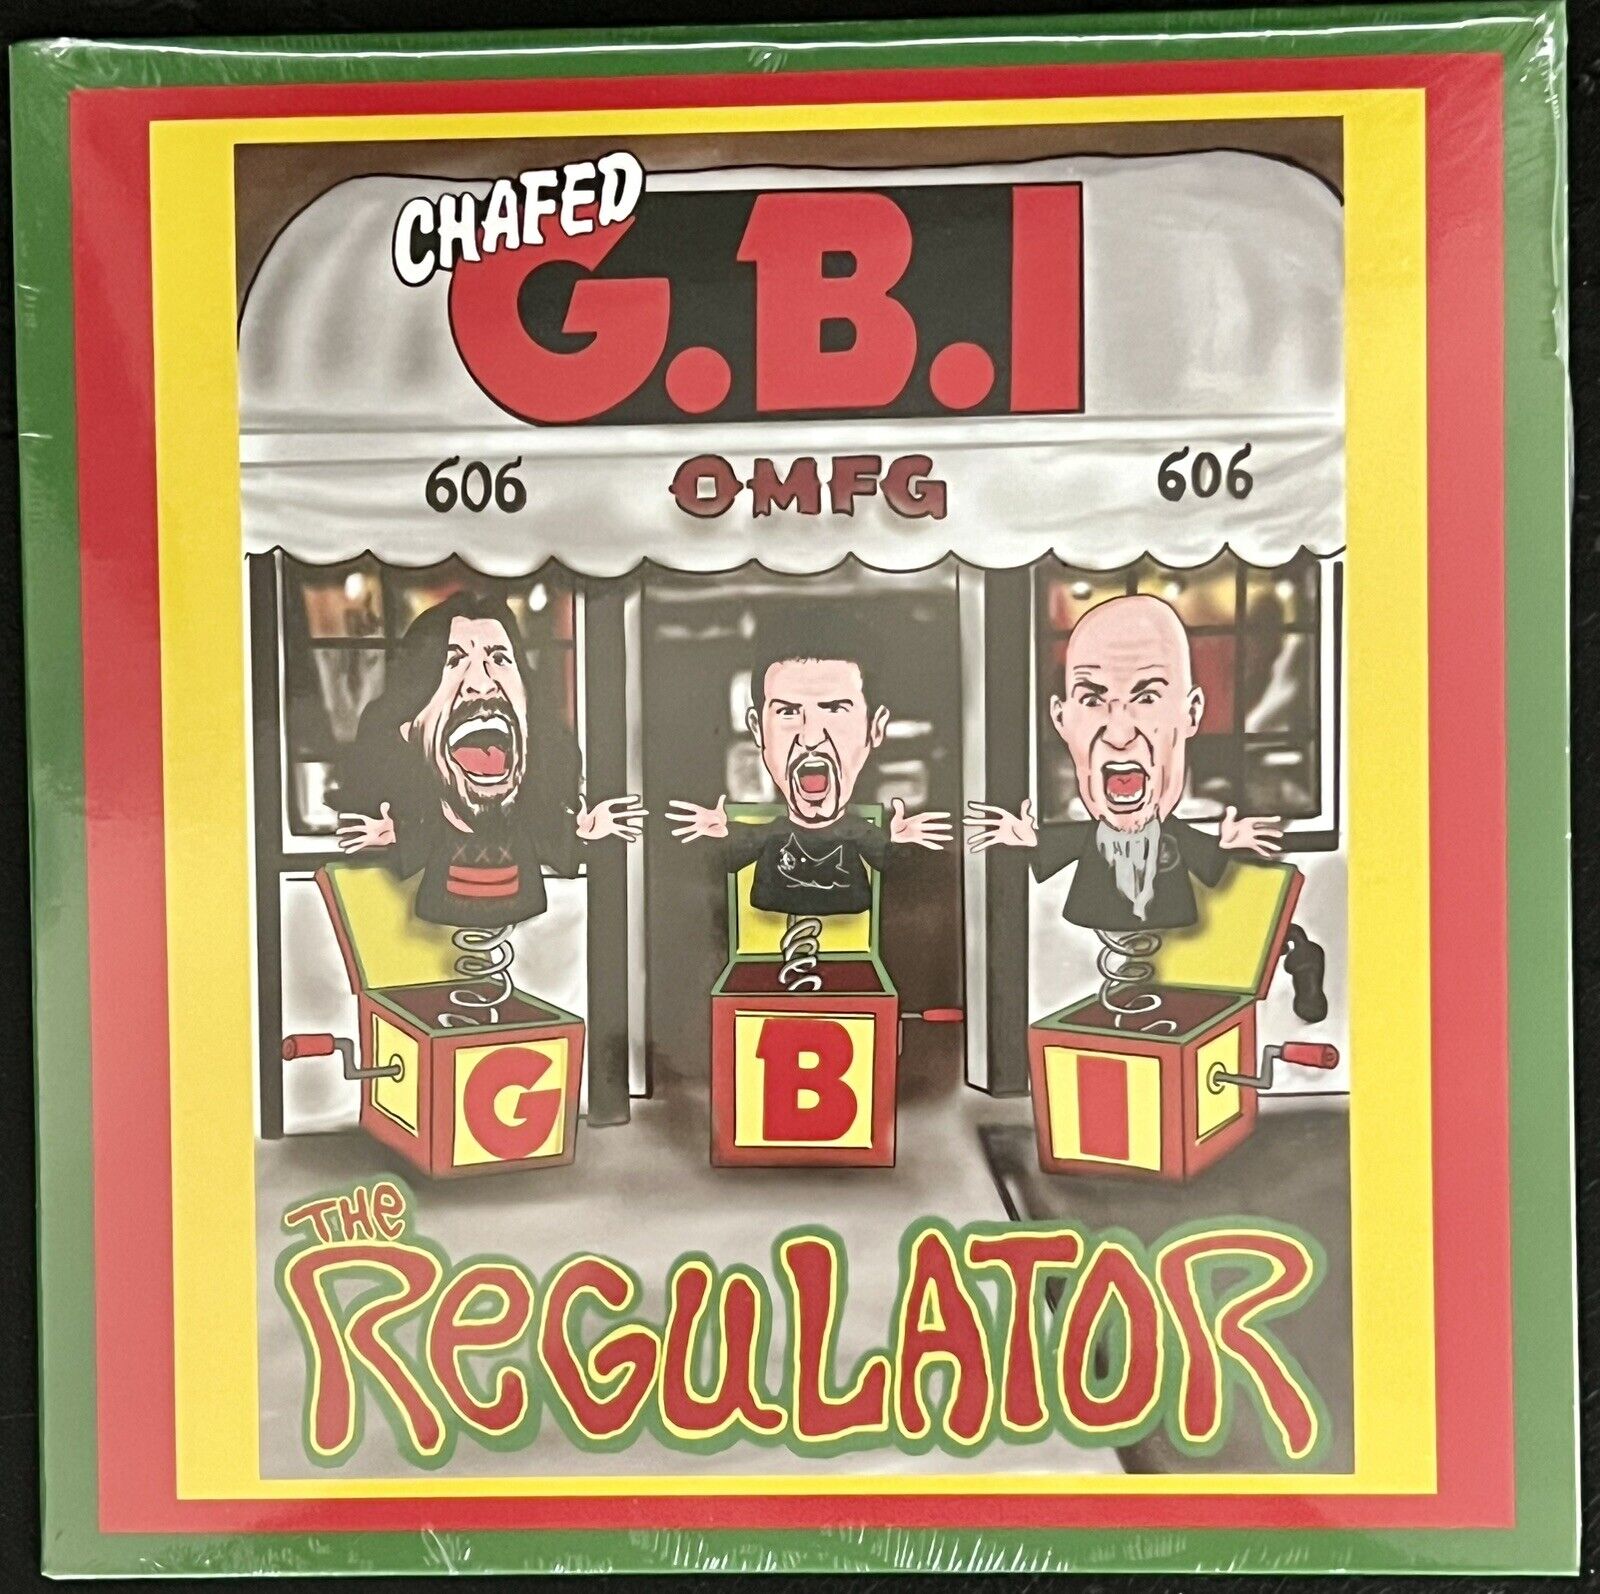 CHAFED G.B.I. The Regulator 7" RSD 2024 Dave Grohl, Foo Fighters, Anthrax 3 p&p